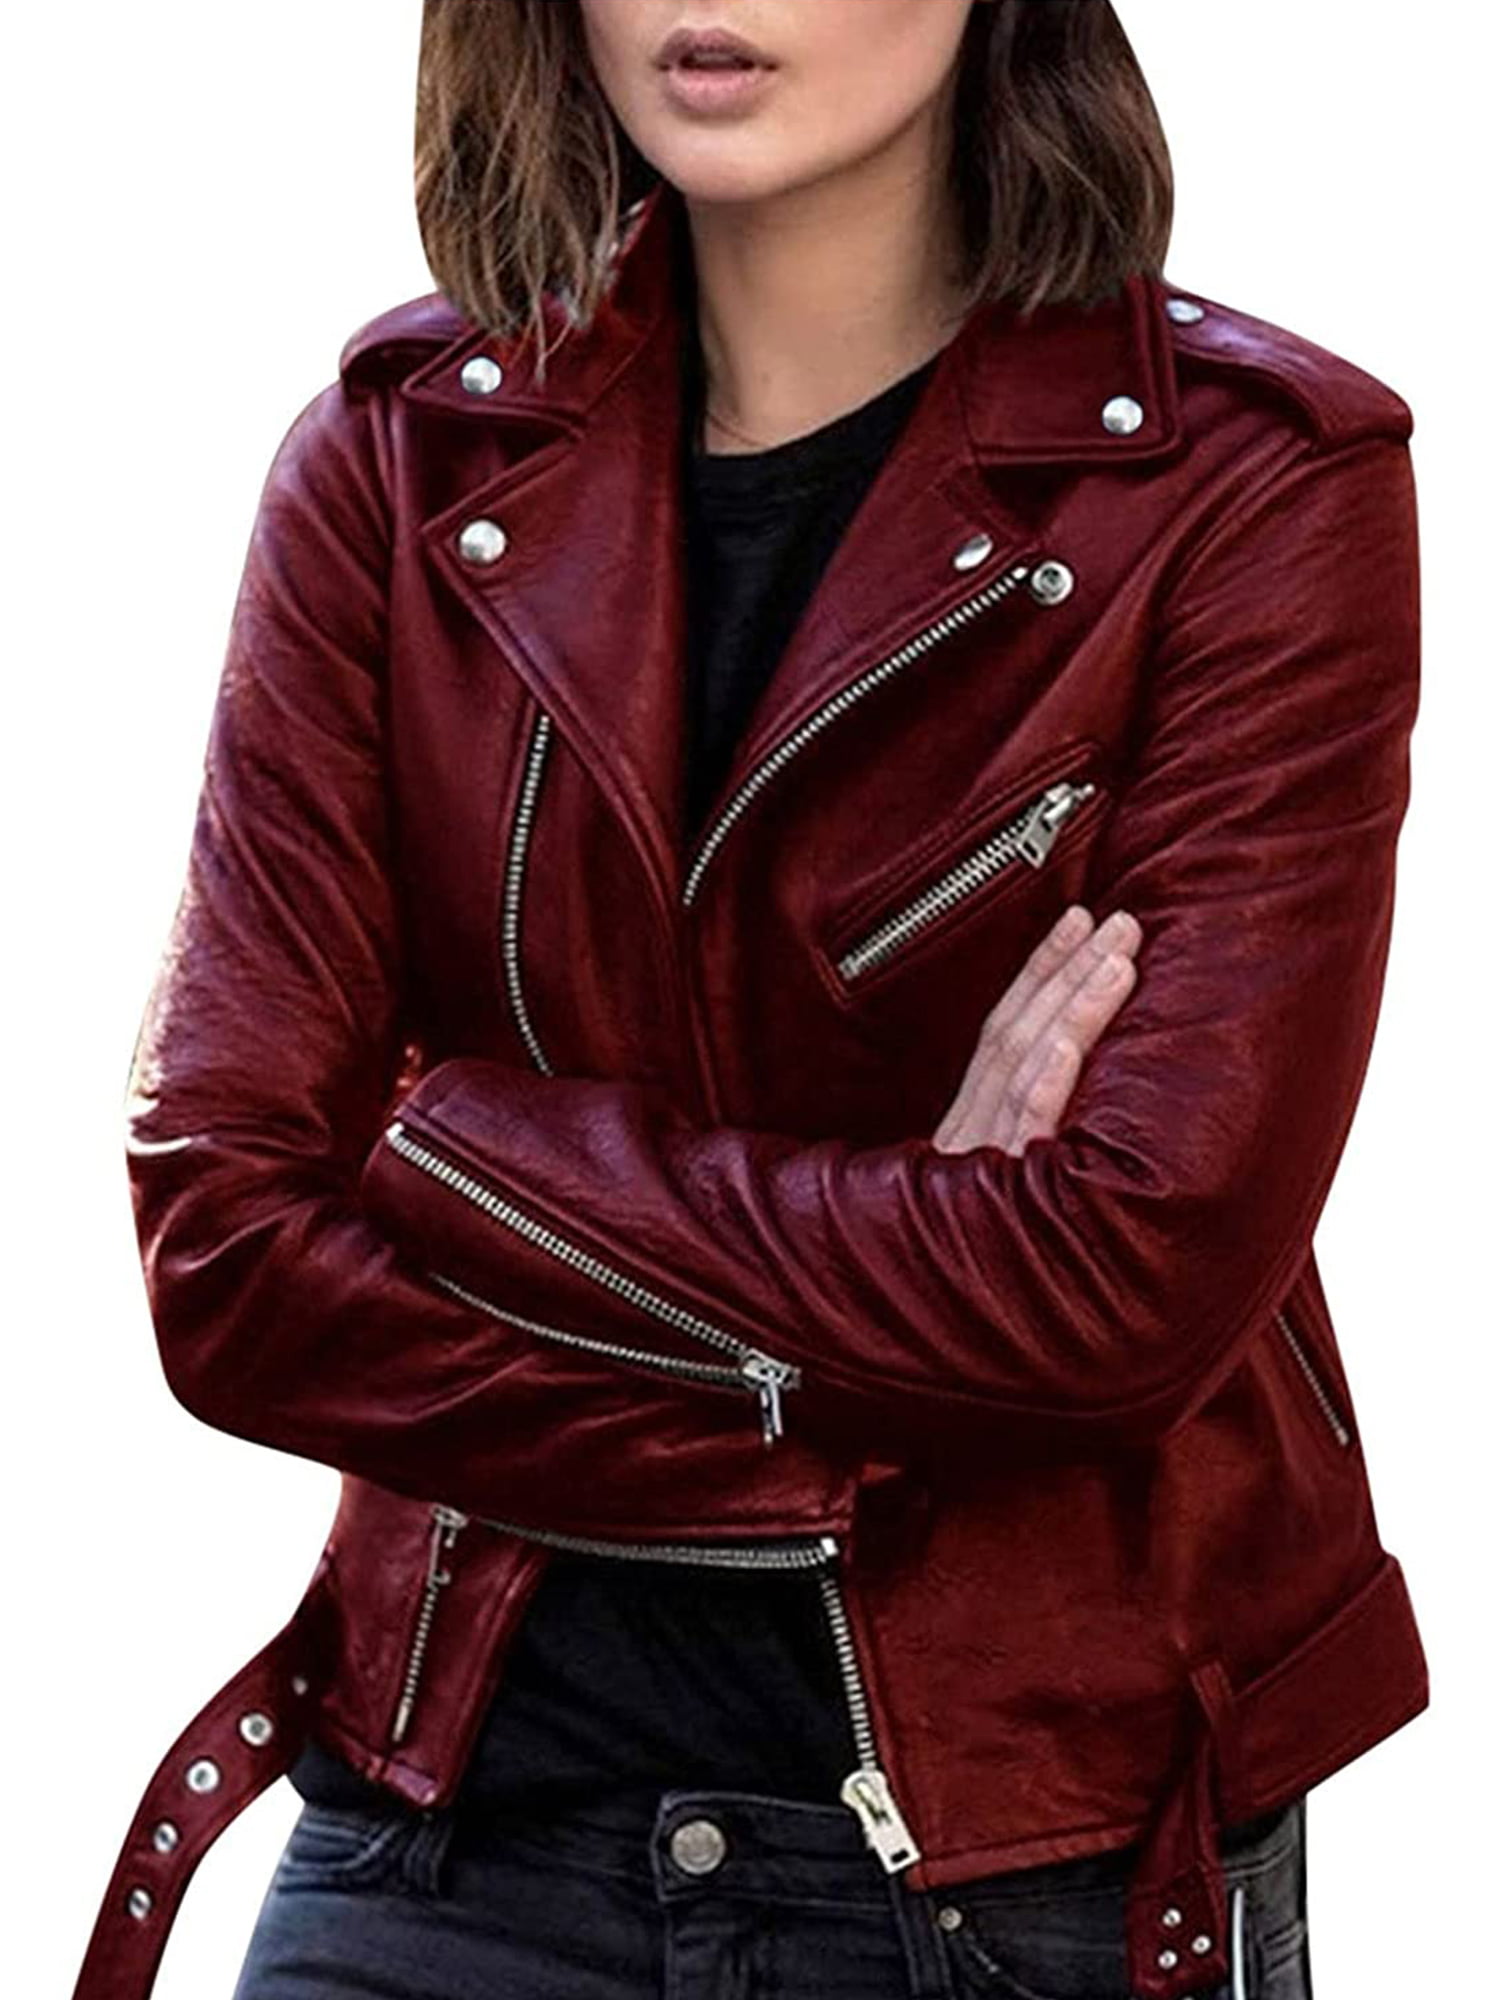 Mstyle Womens Faux Leather Slim Casual Zip Up Biker Jacket Coat Outerwear